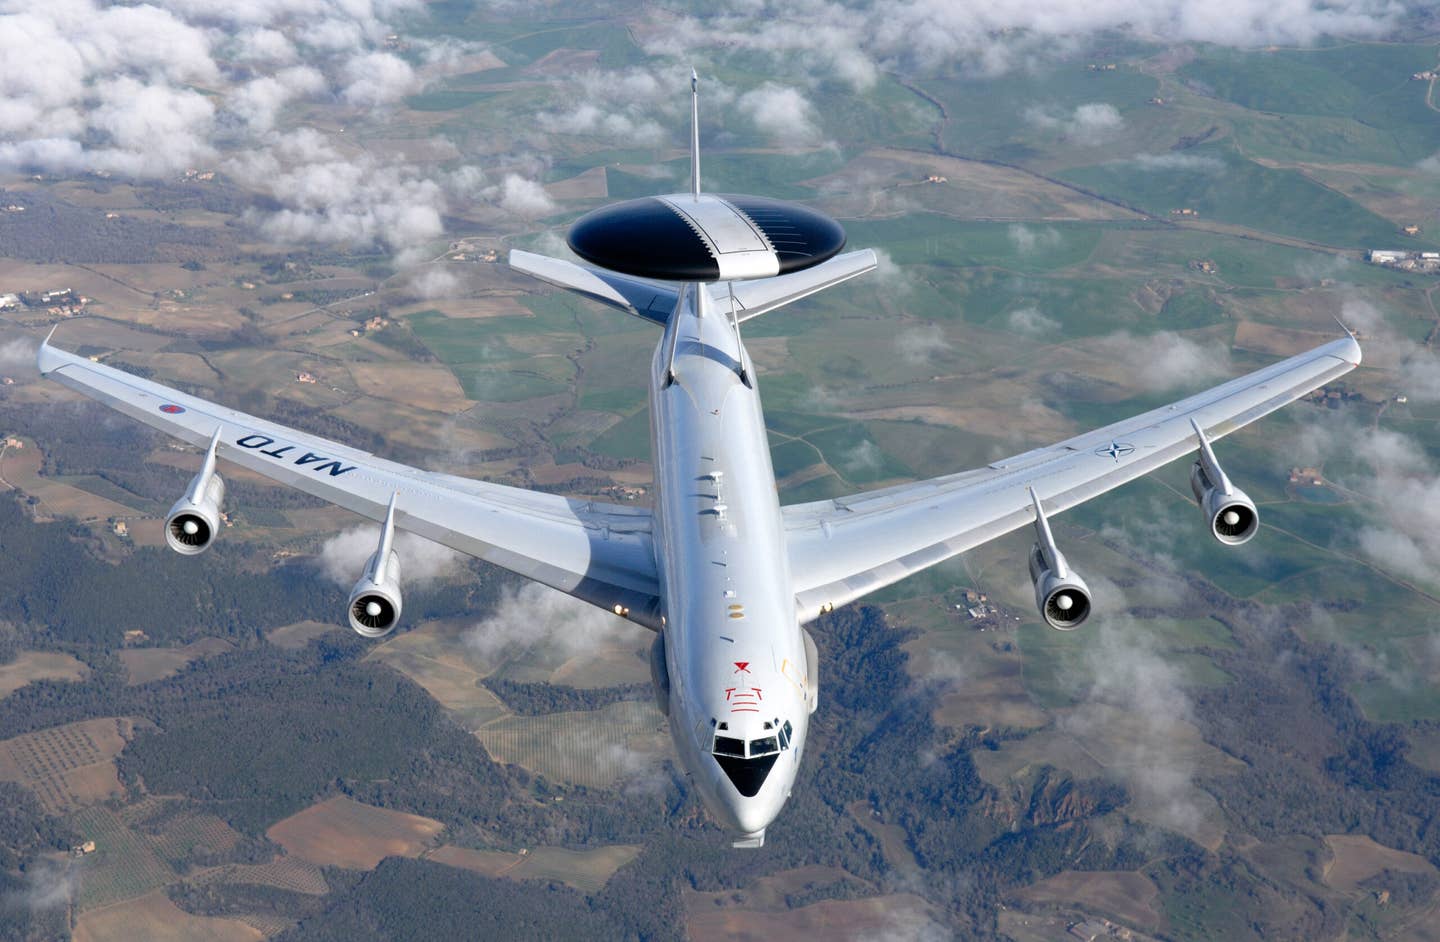 The most recognizable AEW&amp;C platform is the American E-3 Sentry AWACS which serves multiple allies including NATO but is now rapidly aging and becoming hard to support. <em>NATO</em>